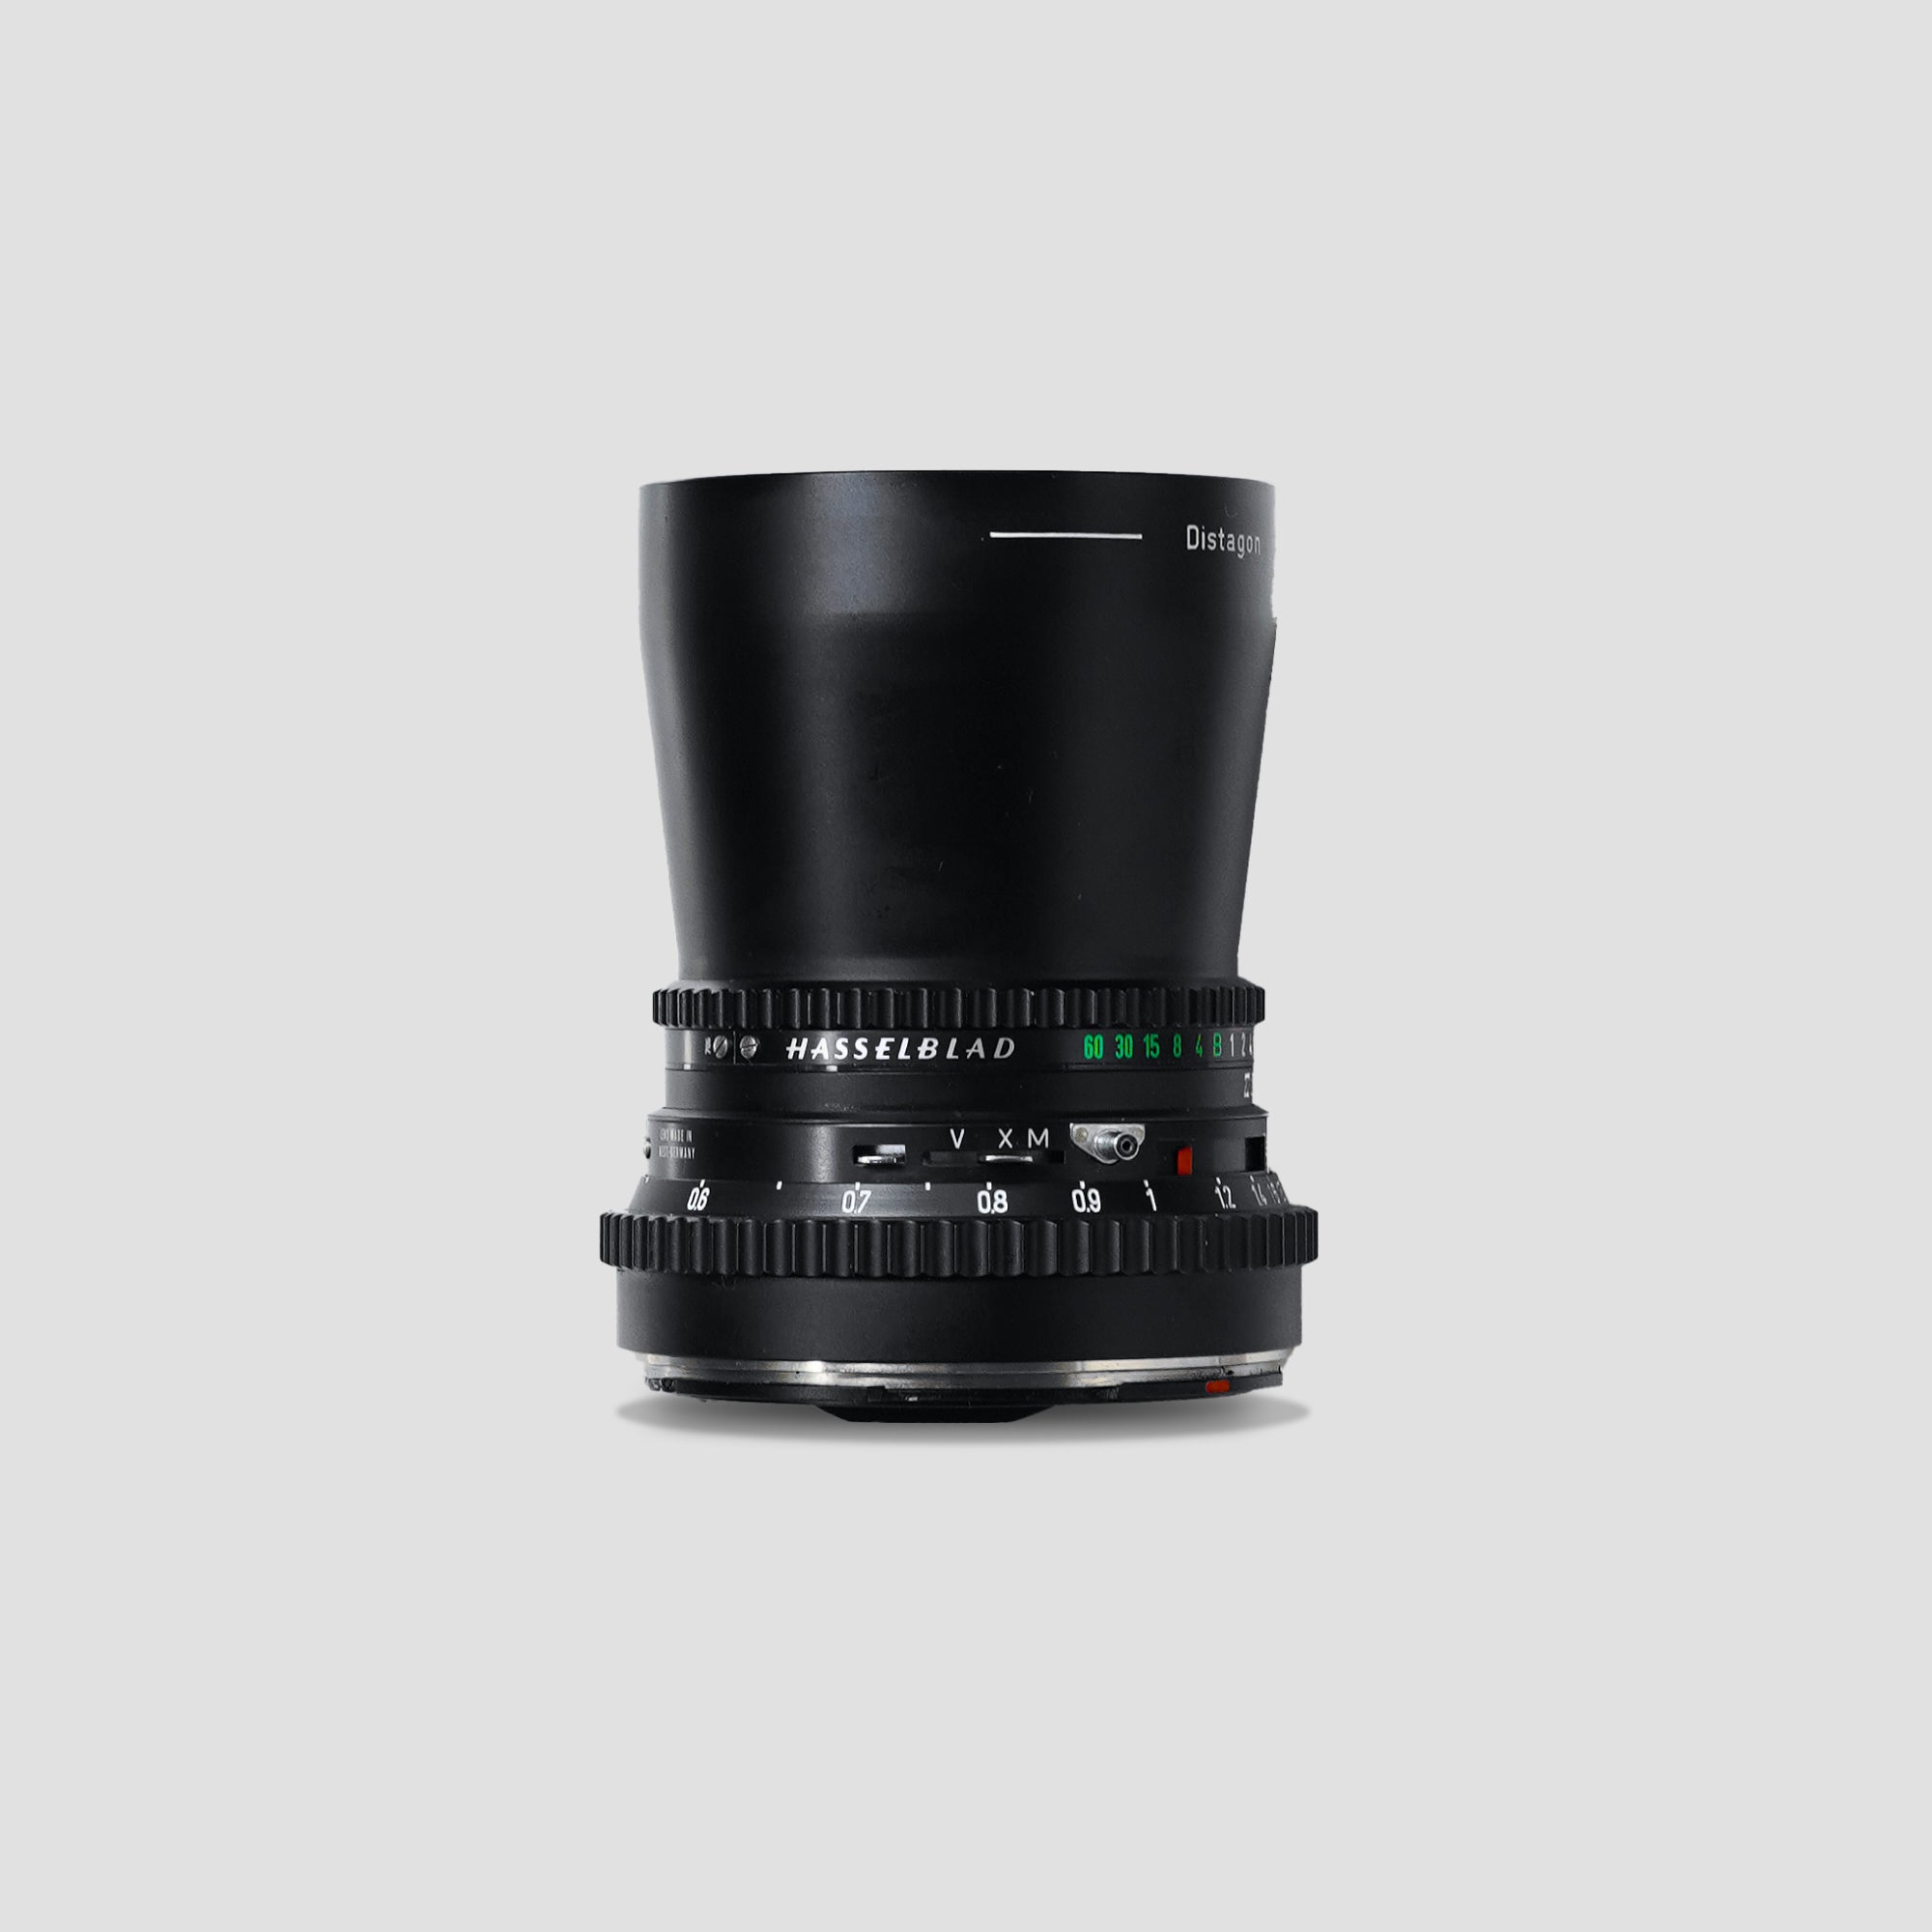 Buy Distagon CF 50mm f4 T* now at Analogue Amsterdam